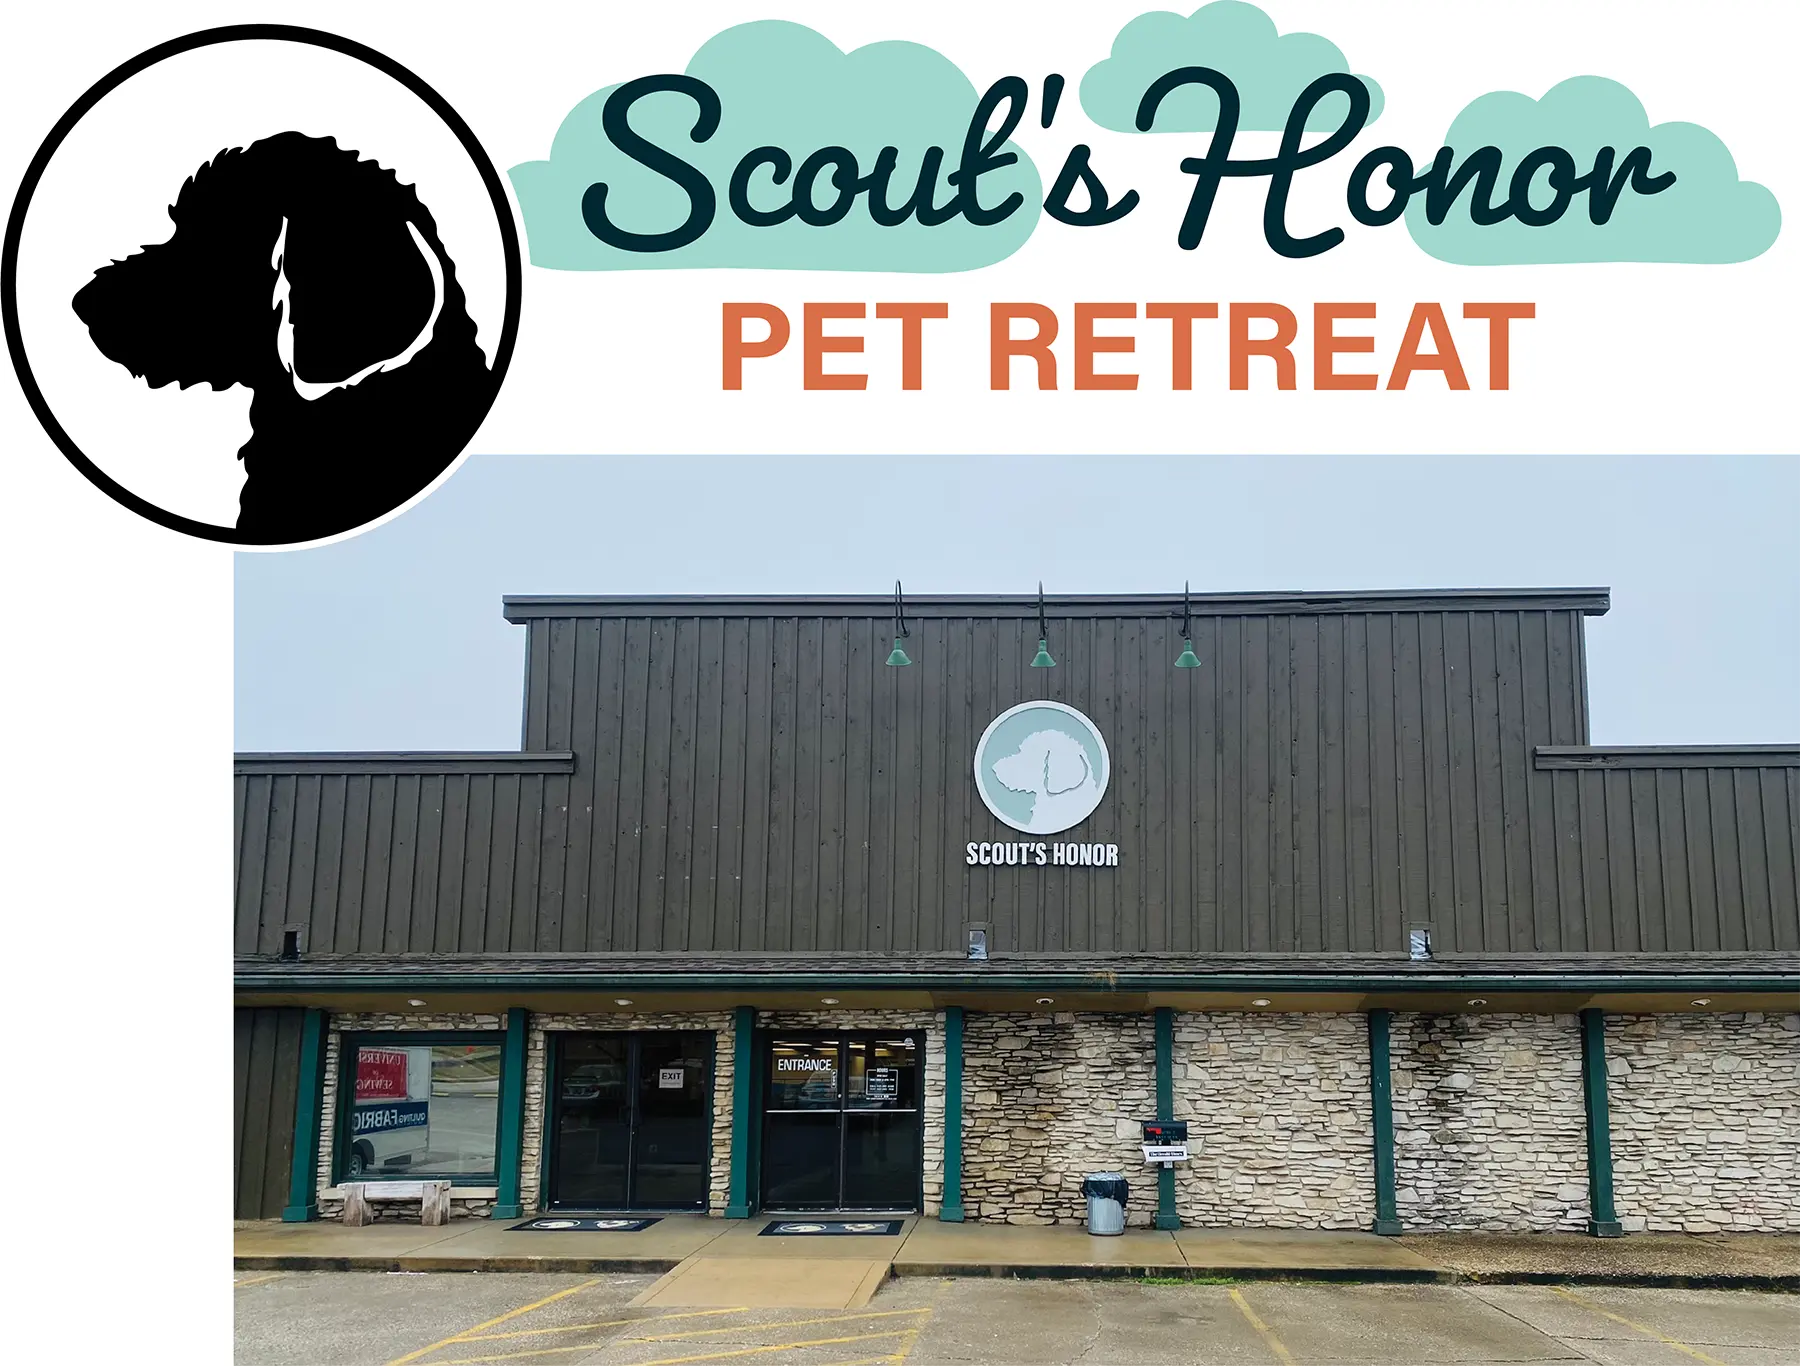 Scout’s Honor Pet Retreat typography and storefront